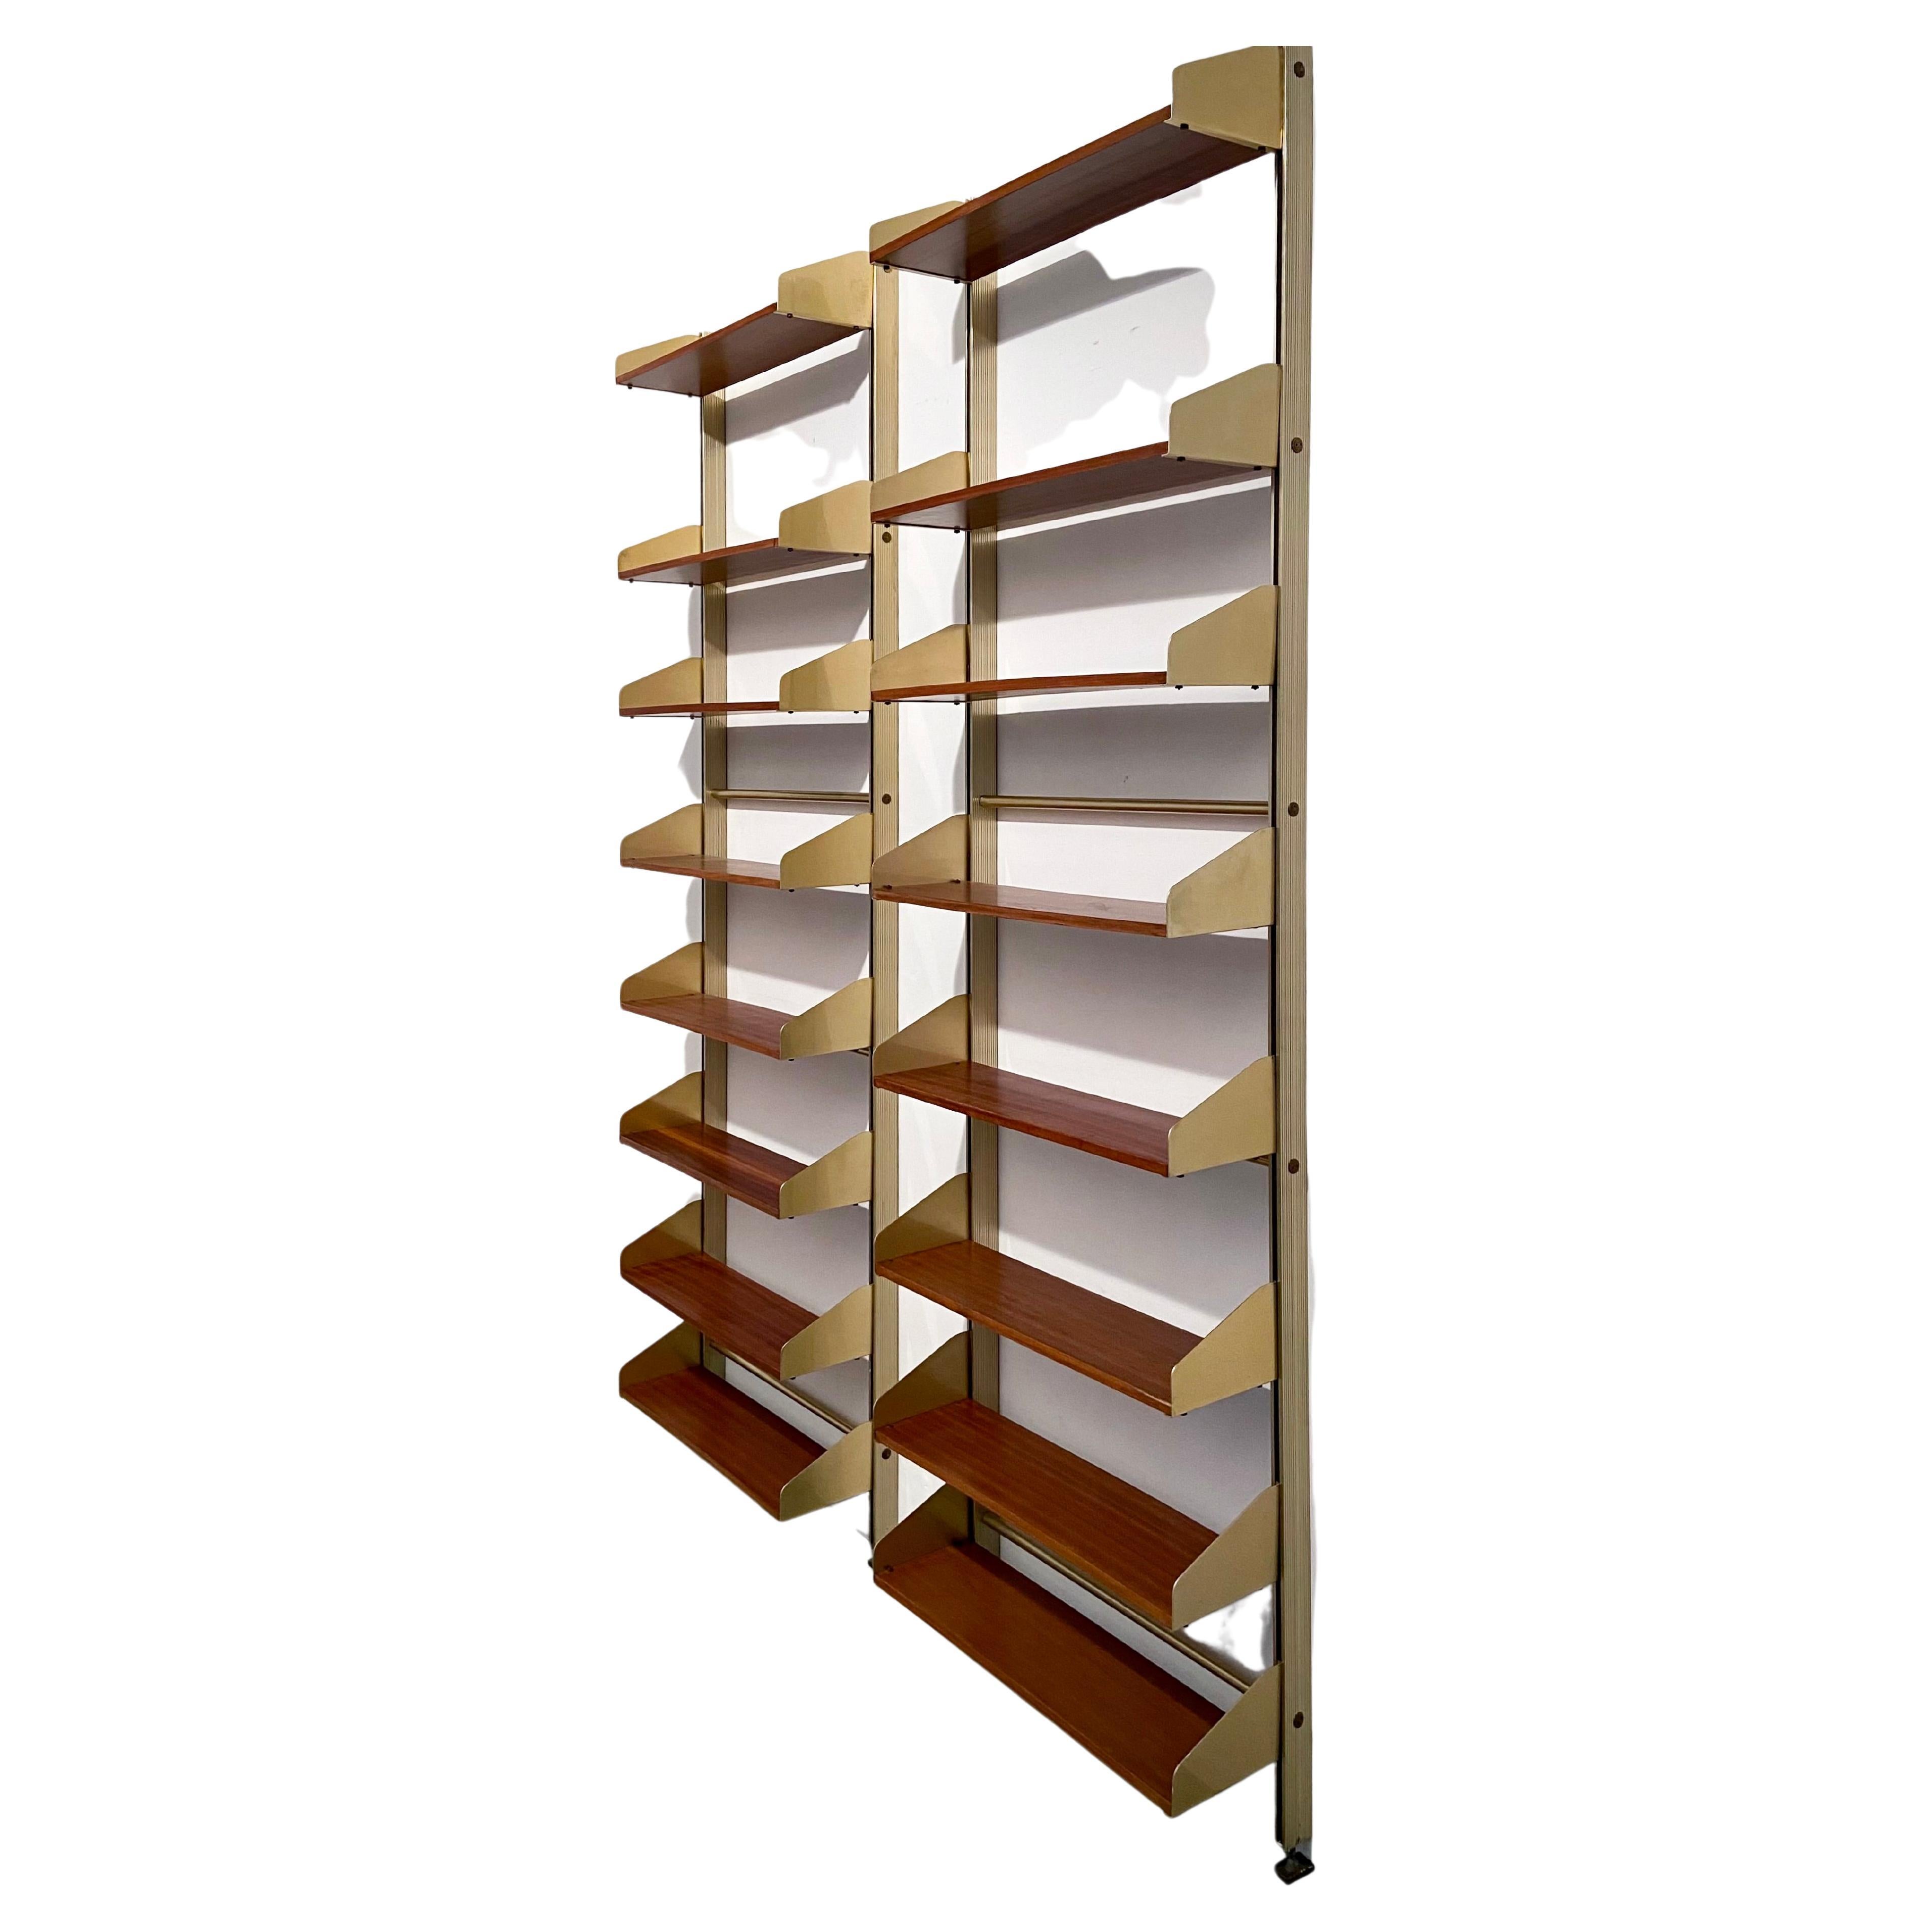 Two ‘S2’ bookshelves in anondised gold aluminium, brass and wood by FEAL (Fonderie Elettriche Alluminio e Leghe), Italy, 1957.

These bookshelves have been built cleverly. The shelves are adjustable by a moving them up or down and click them in. The